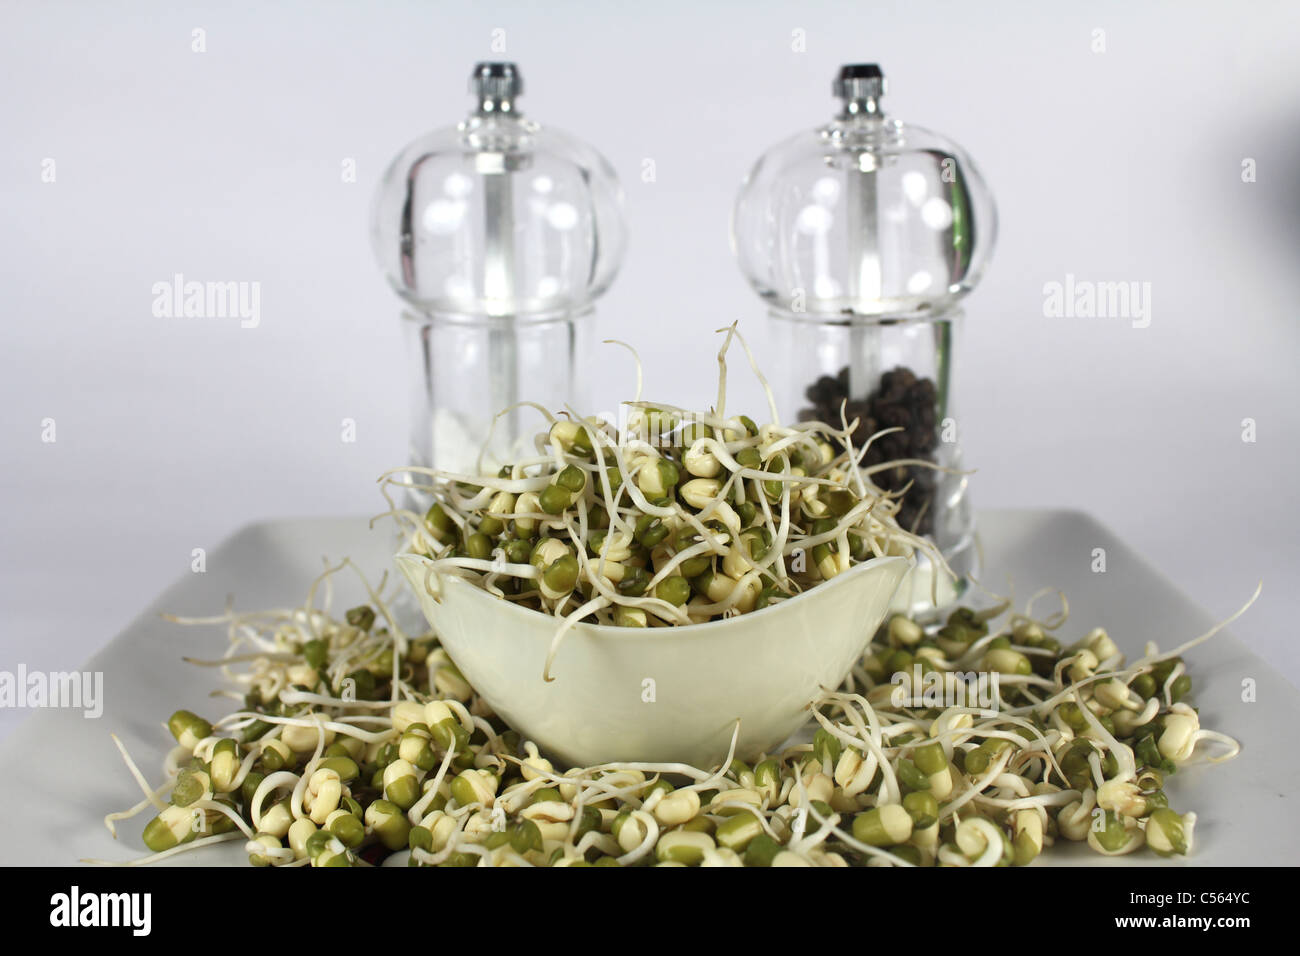 Green gram sprout with salt and pepper container in the background Stock Photo